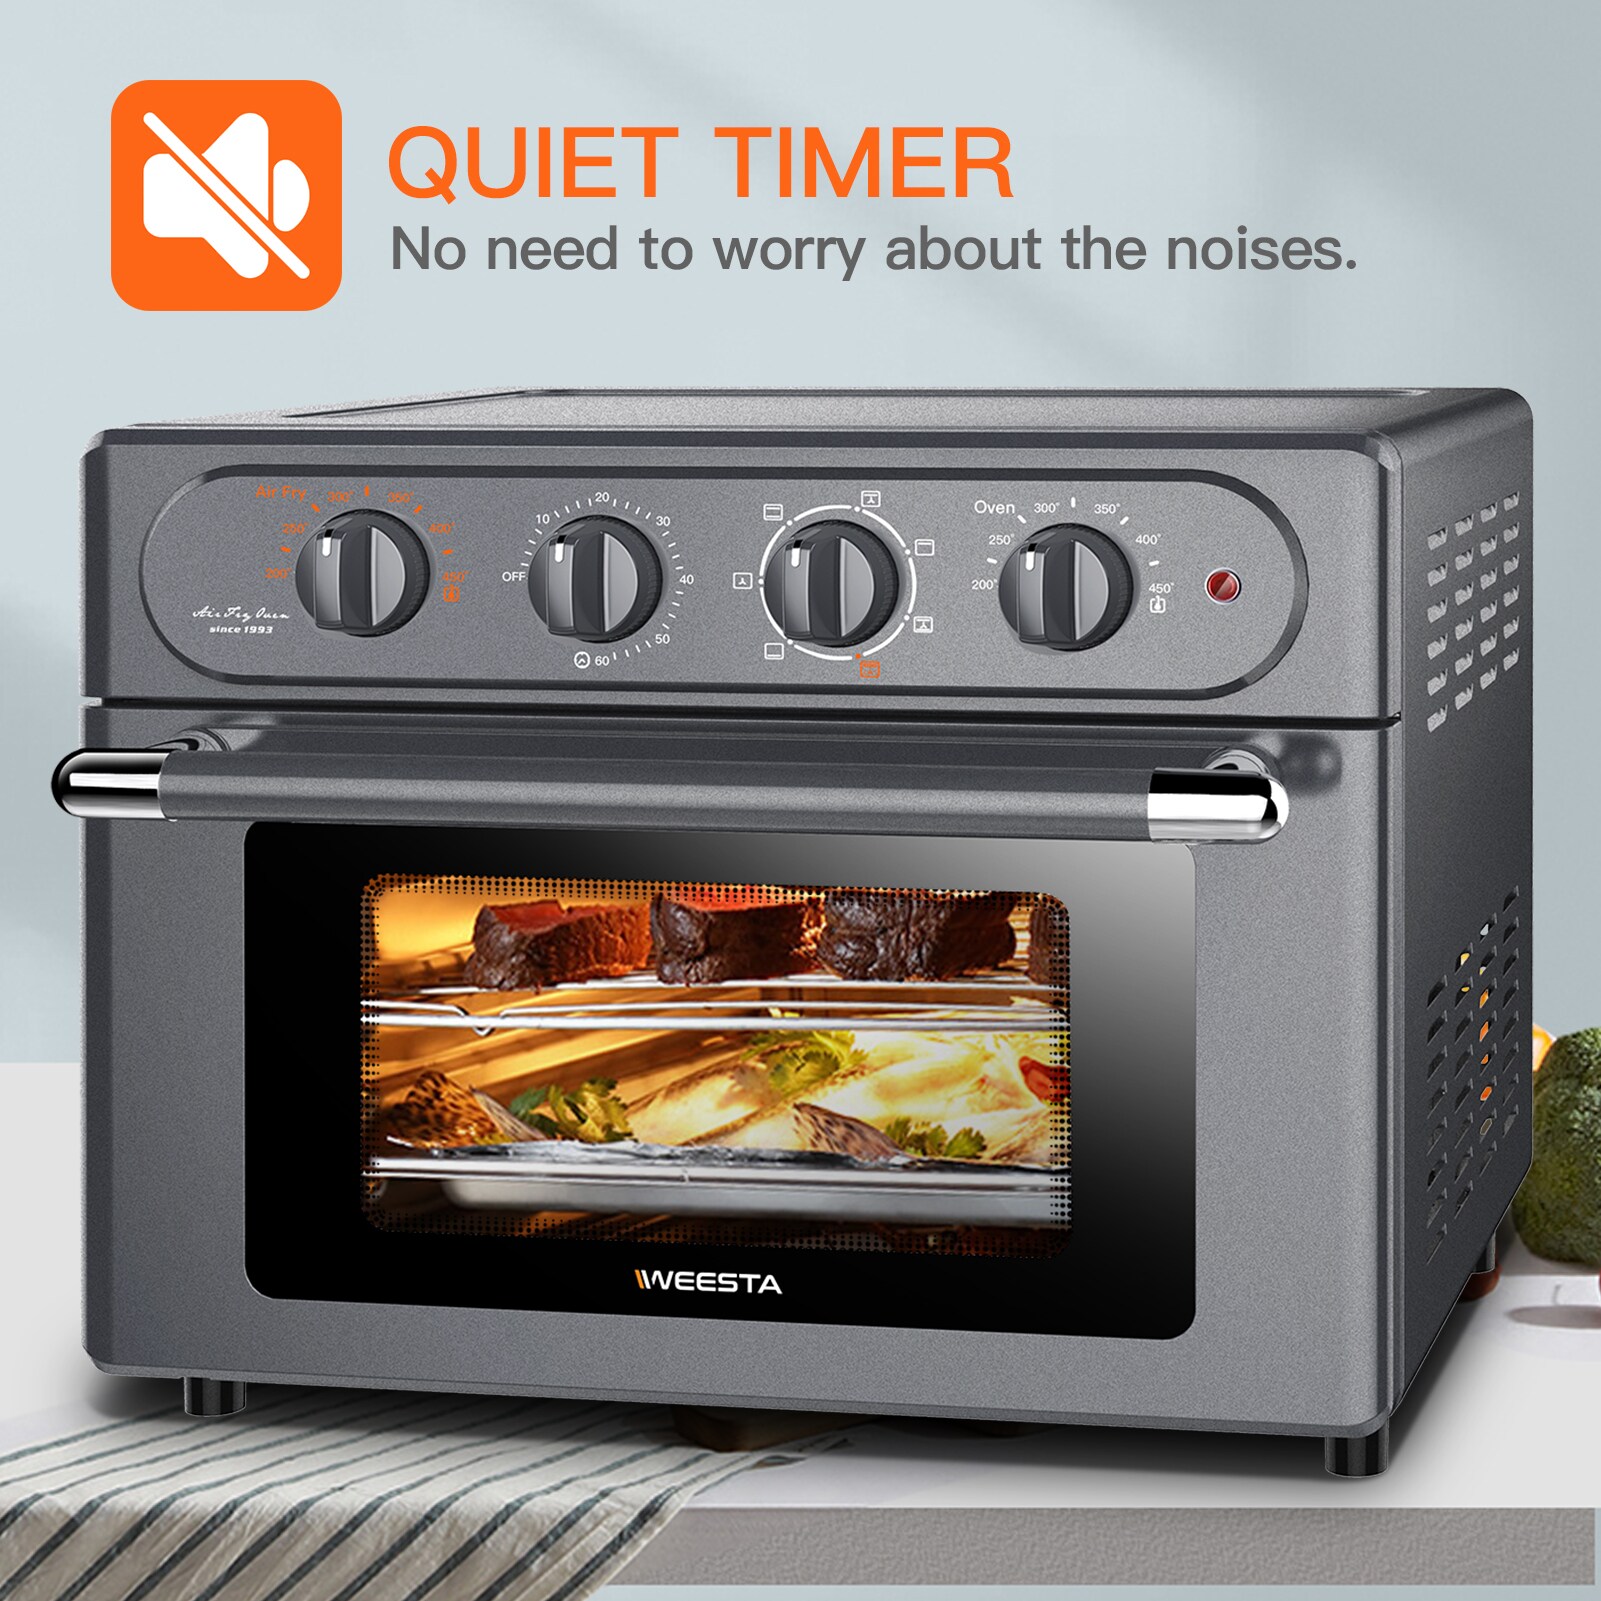 Oster 2-Slice Toaster with Advanced Toast Technology, Stainless Steel -  AliExpress